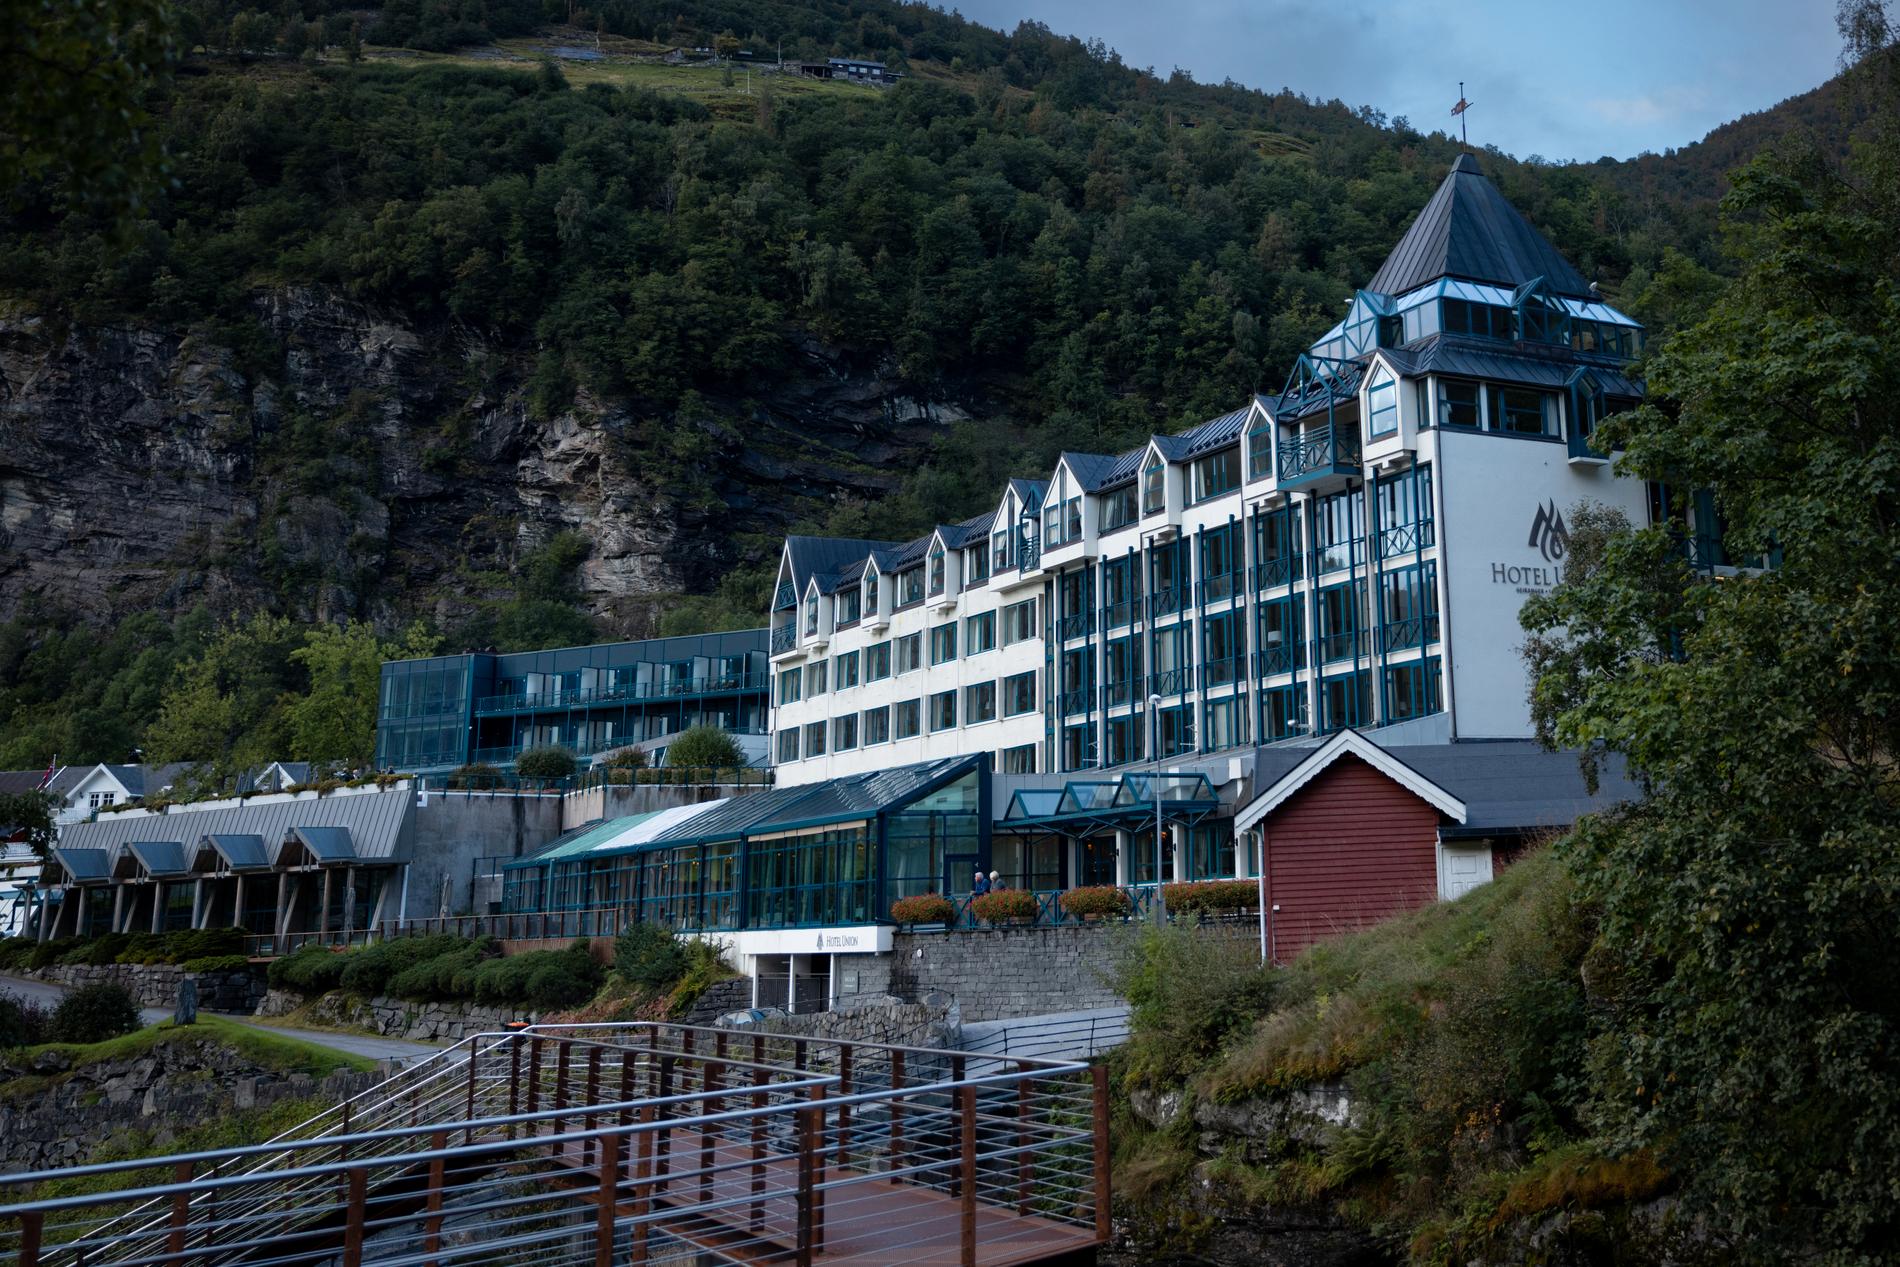 The wedding: The Union Hotel in Geiranger, run by a couple, will be the venue for the celebration next fall. 